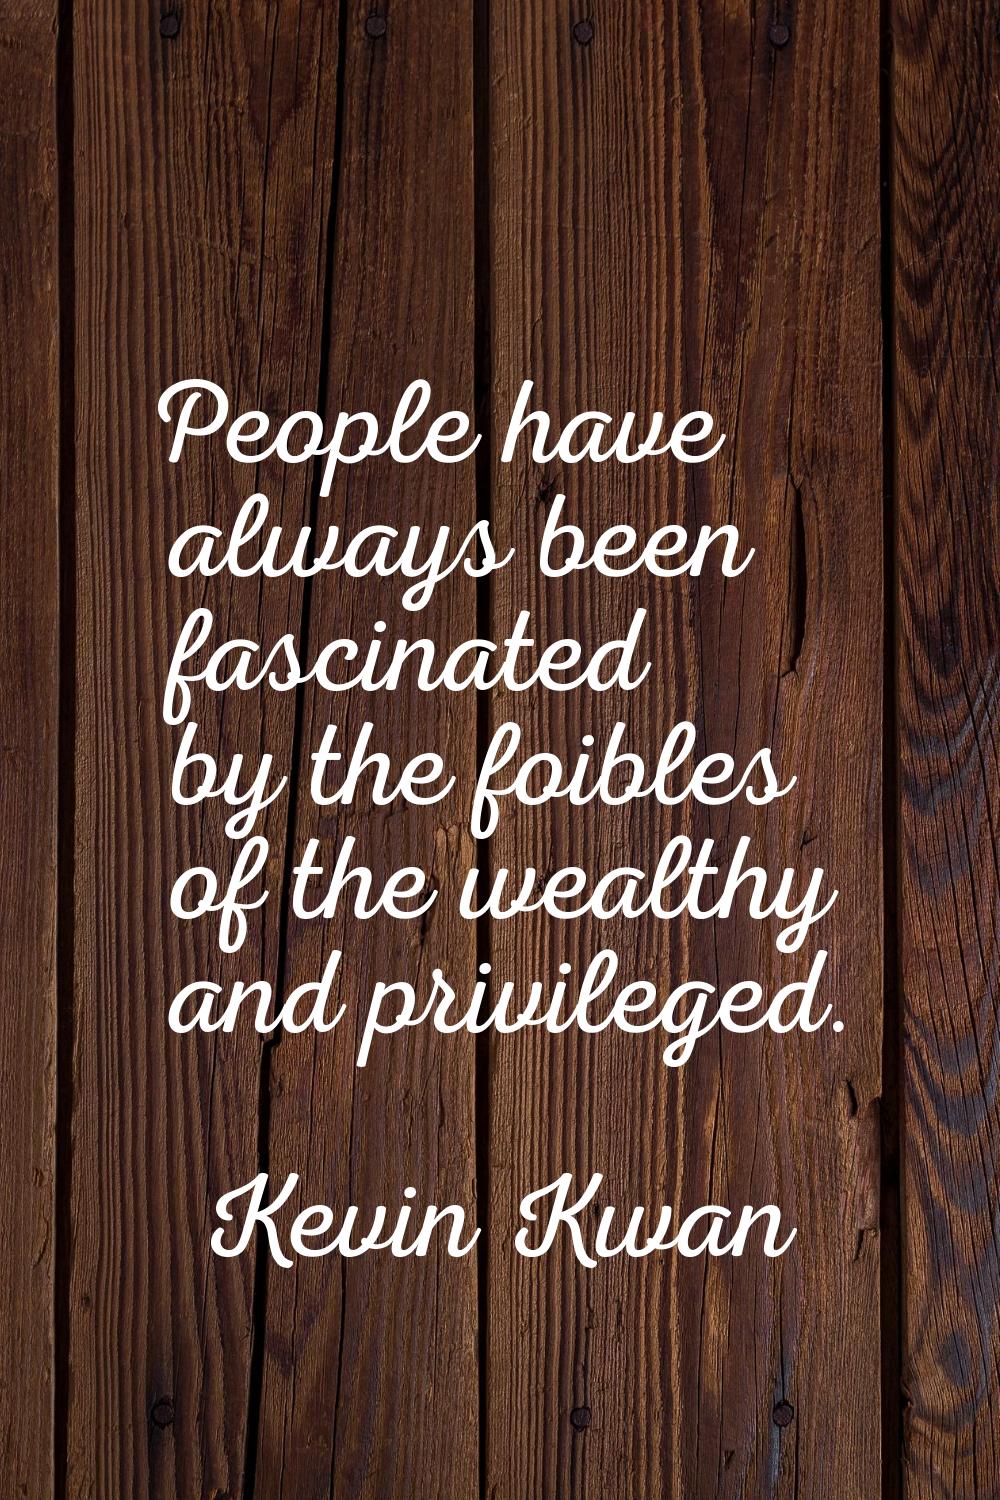 People have always been fascinated by the foibles of the wealthy and privileged.